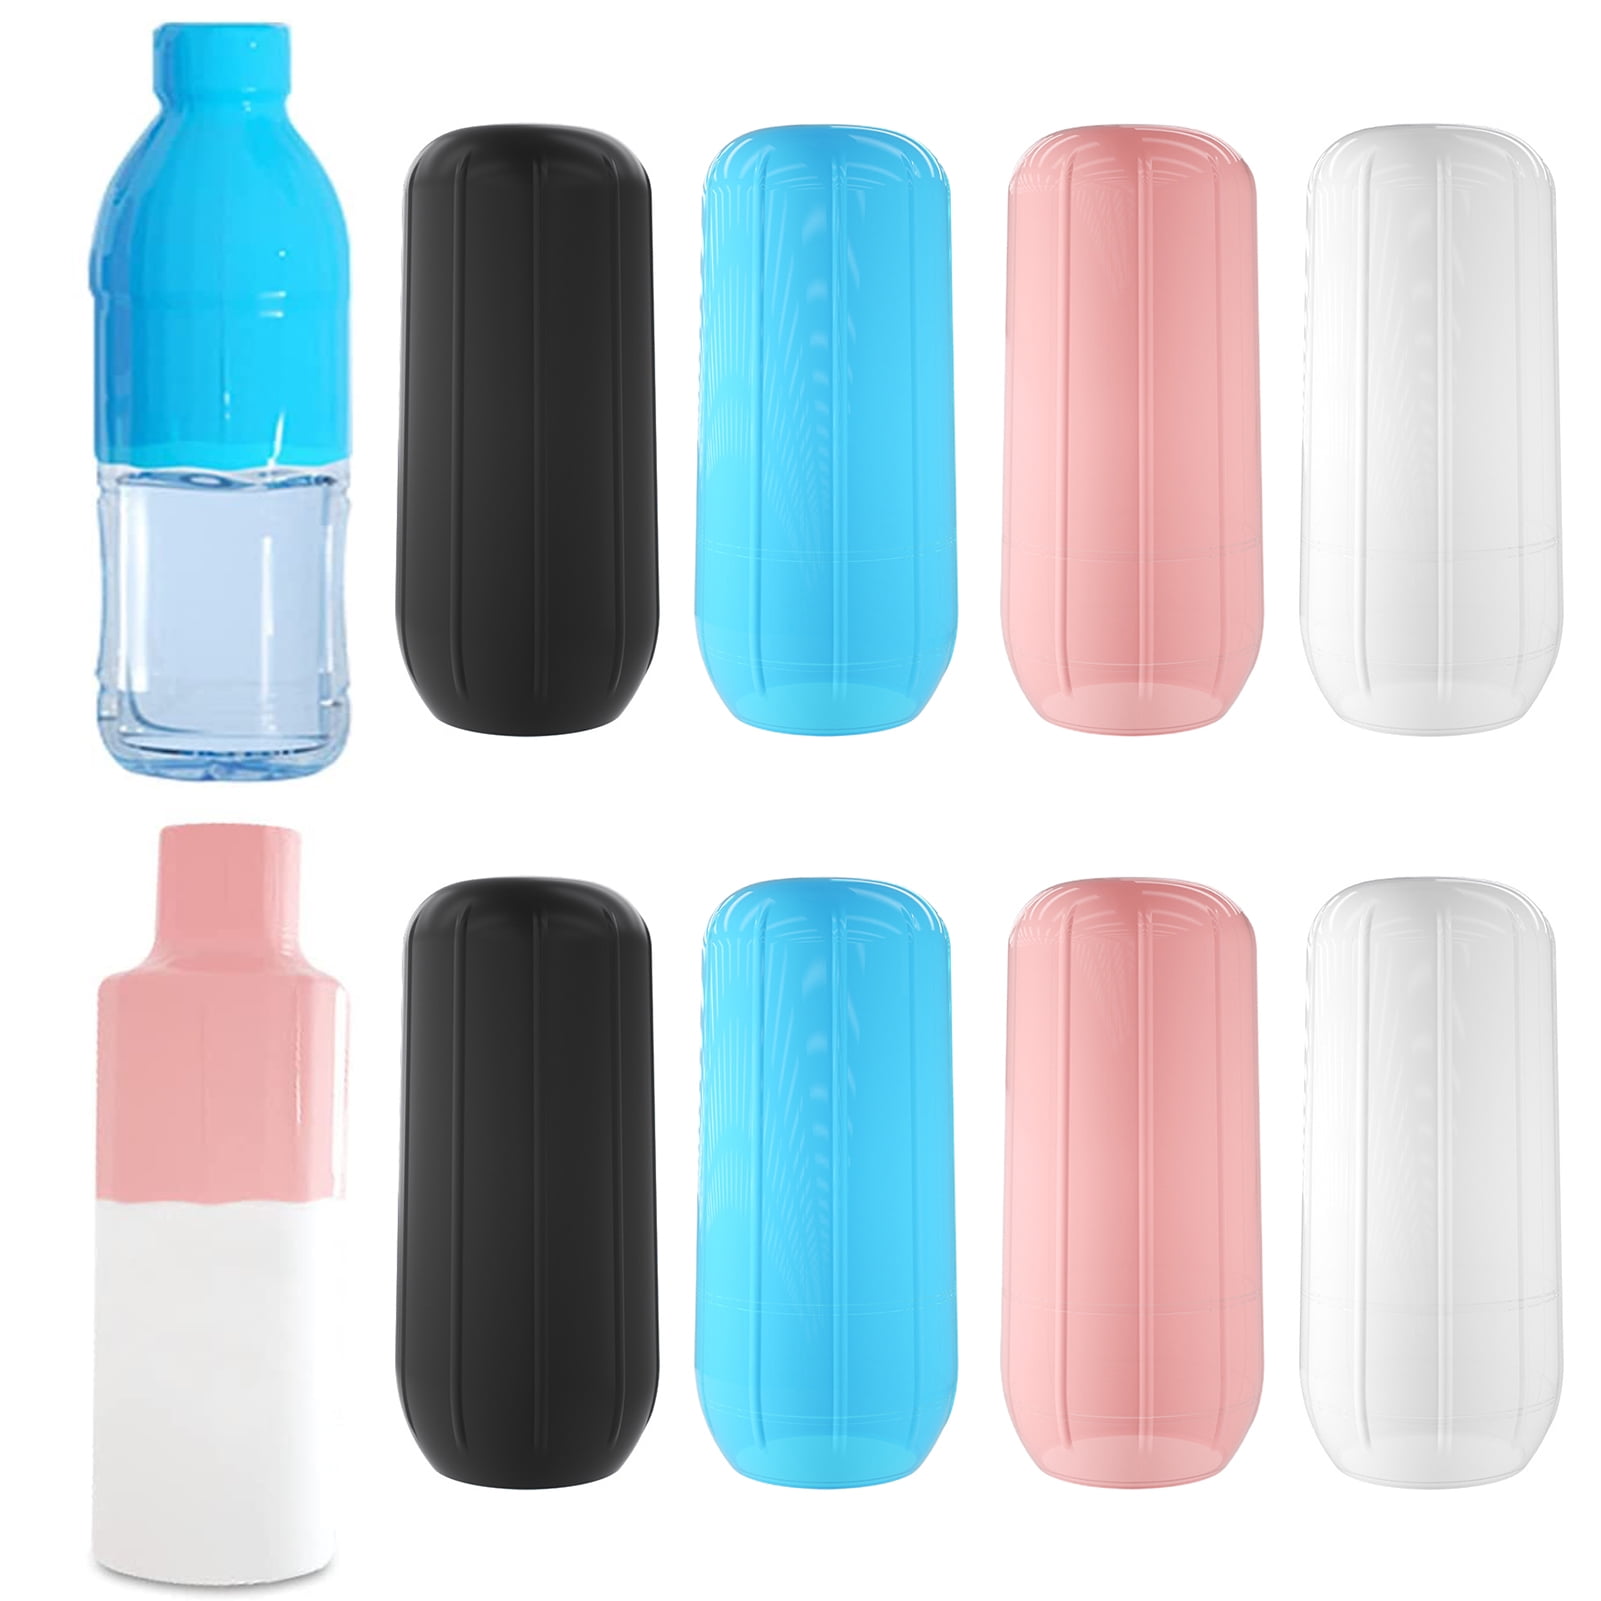 heylad 12Pcs Travel Bottle Covers, silicone elastic sleeve for travel  containers, reusable travel accessory for leak-proofing in luggage, fits  most